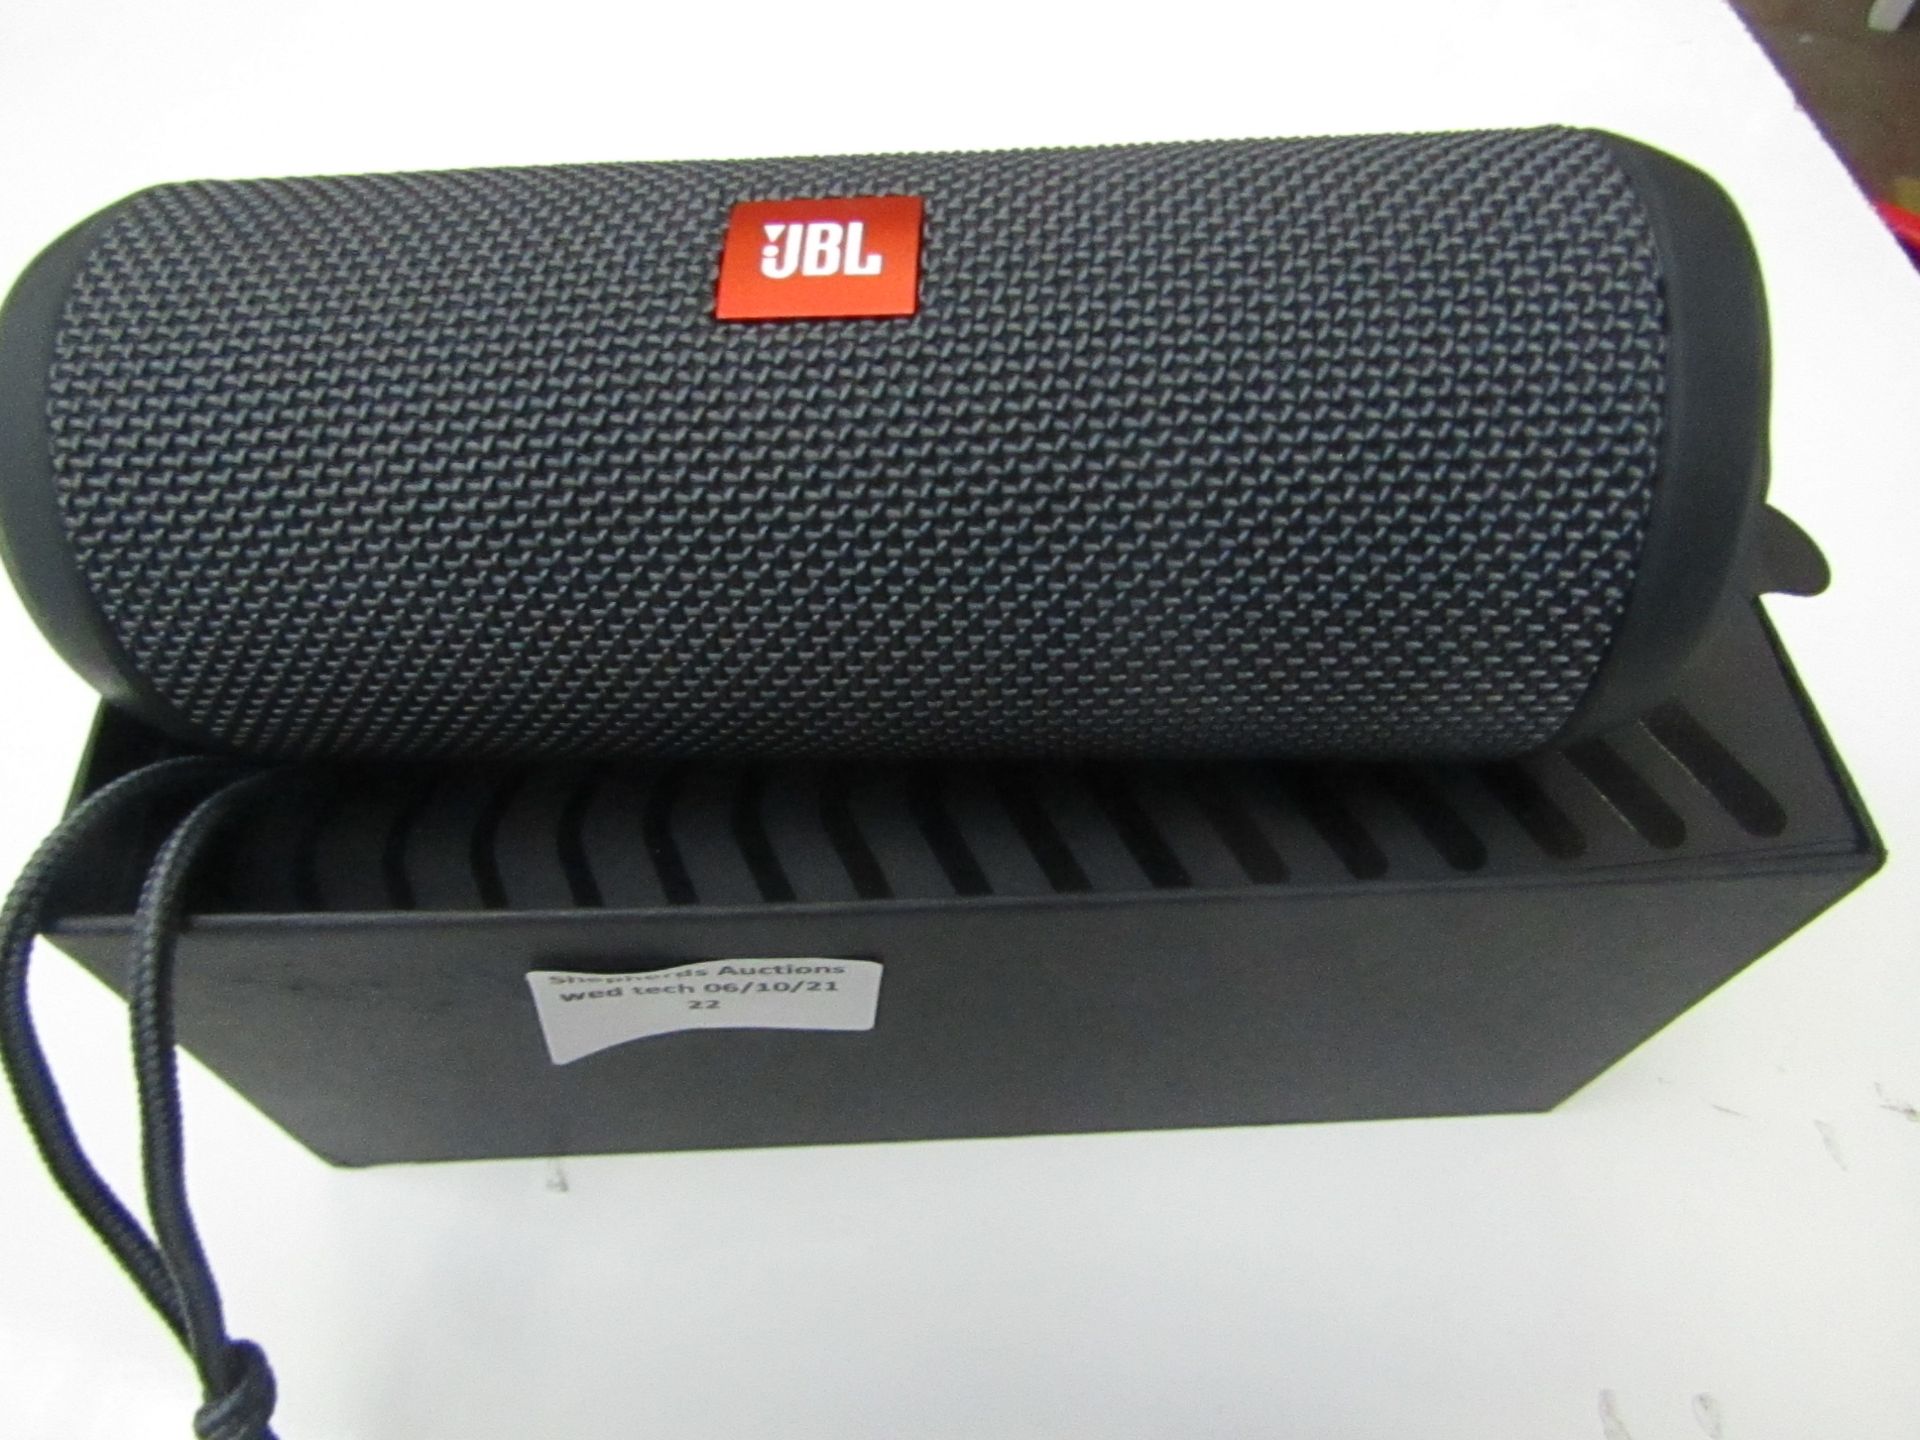 JBL Flip essential wireless speaker, unchecked as no power but it could just need charging, RRP £